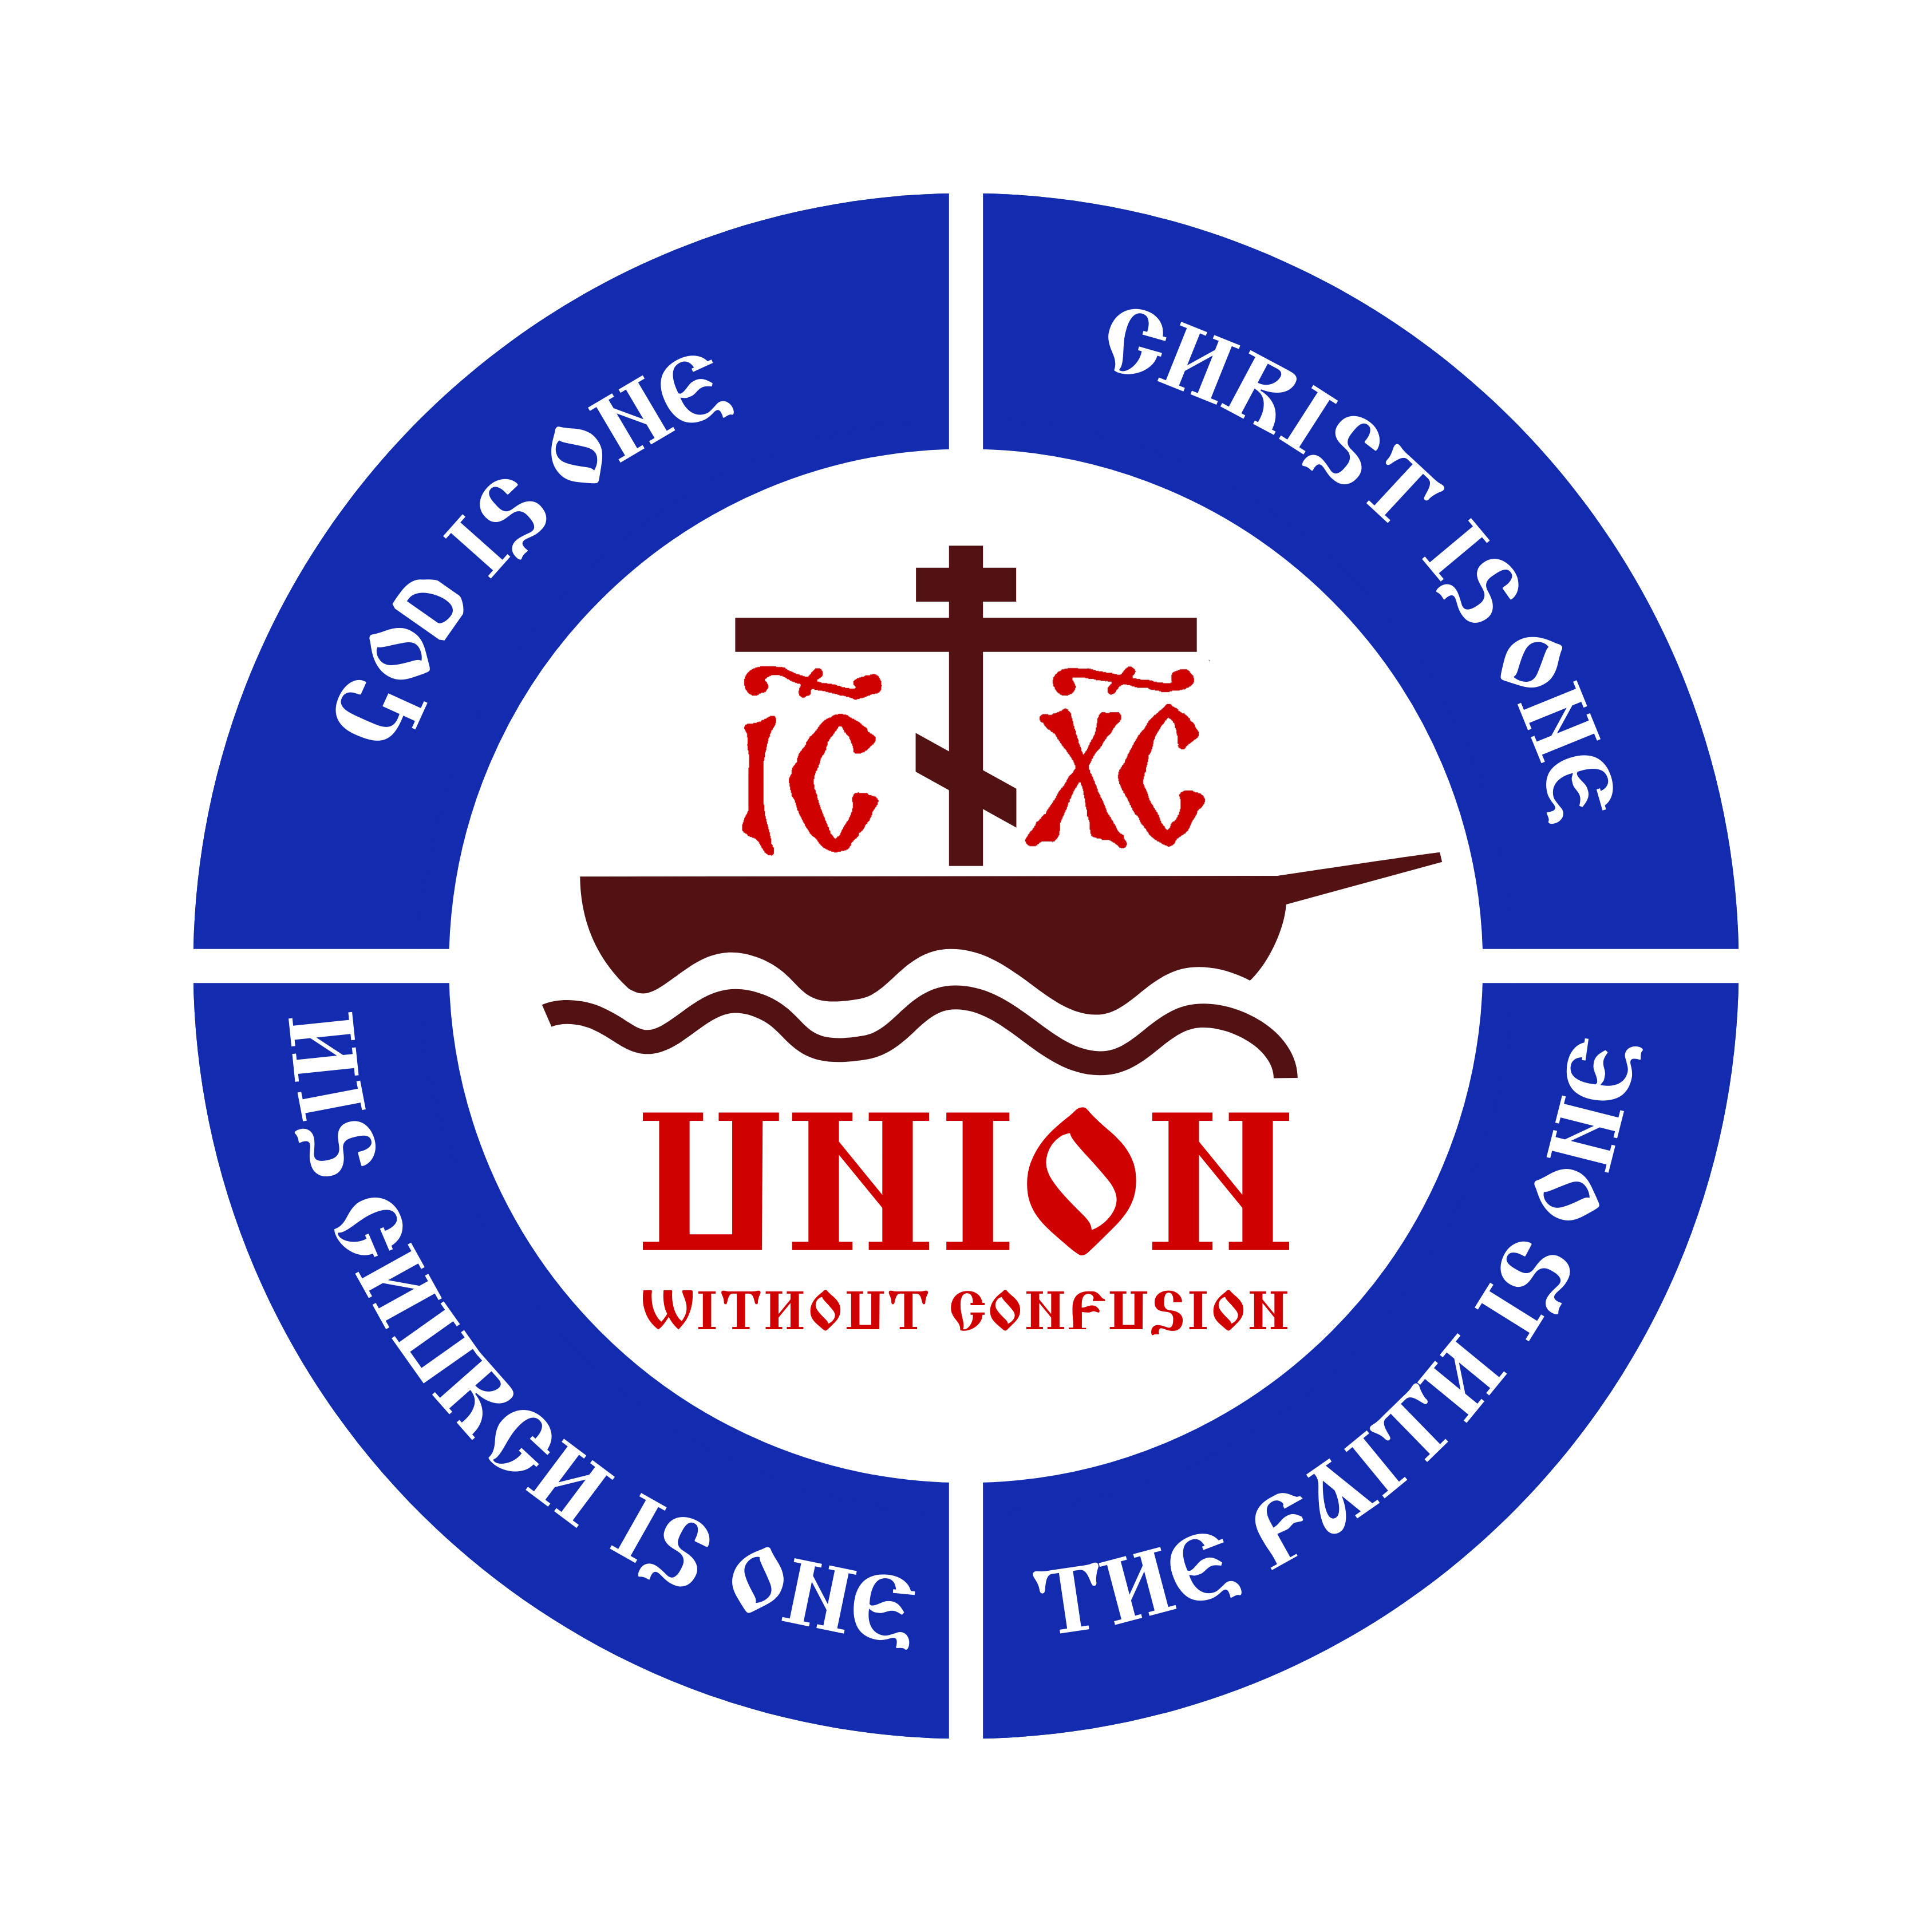 UNION WITHOUT CONFUSION